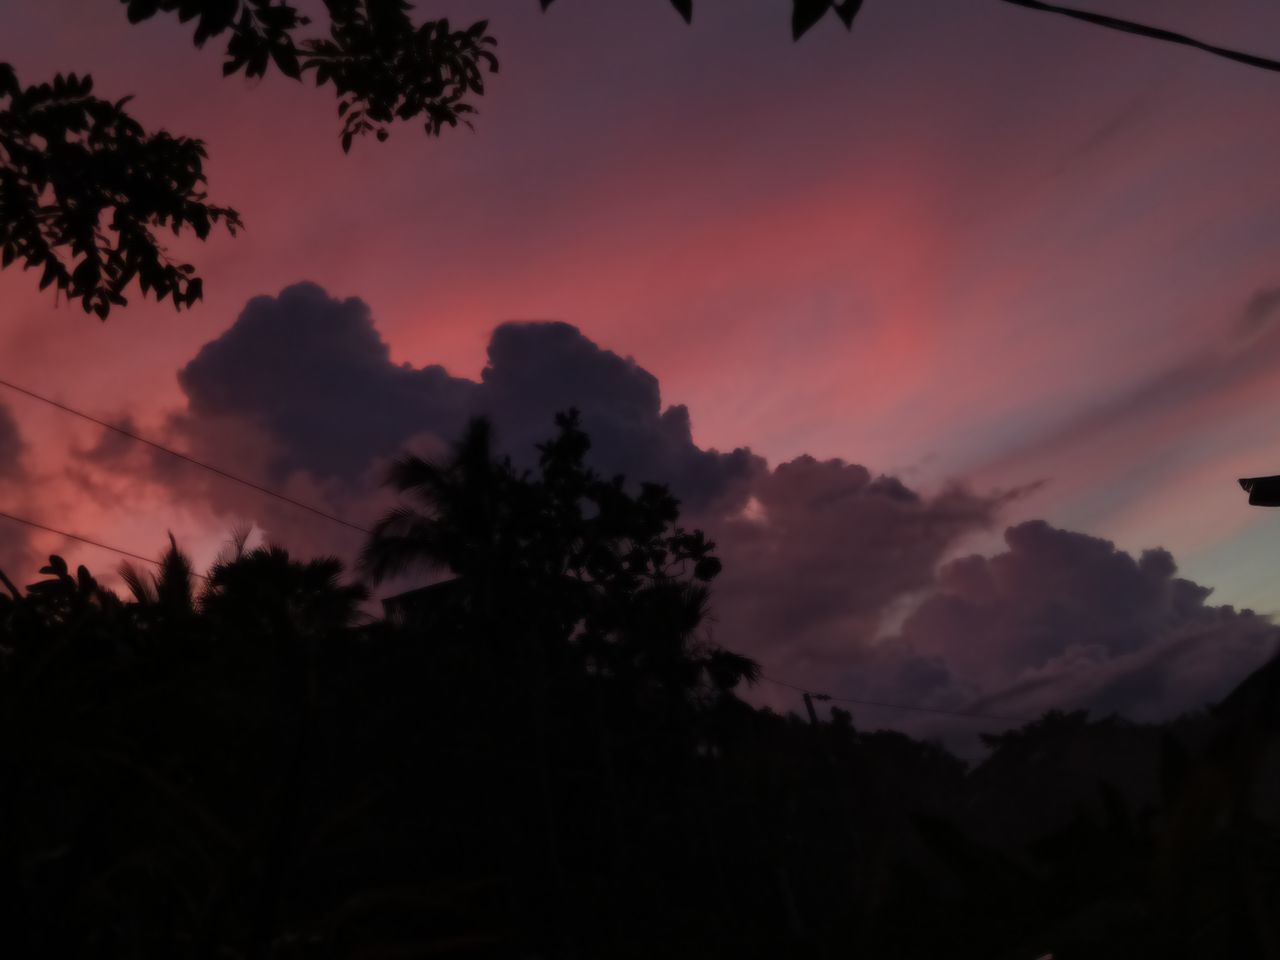 sky, tree, cloud, sunset, silhouette, beauty in nature, plant, nature, scenics - nature, dawn, evening, mountain, tranquility, darkness, environment, no people, tranquil scene, landscape, outdoors, afterglow, dramatic sky, red sky at morning, night, idyllic, mountain range, twilight, land, travel destinations